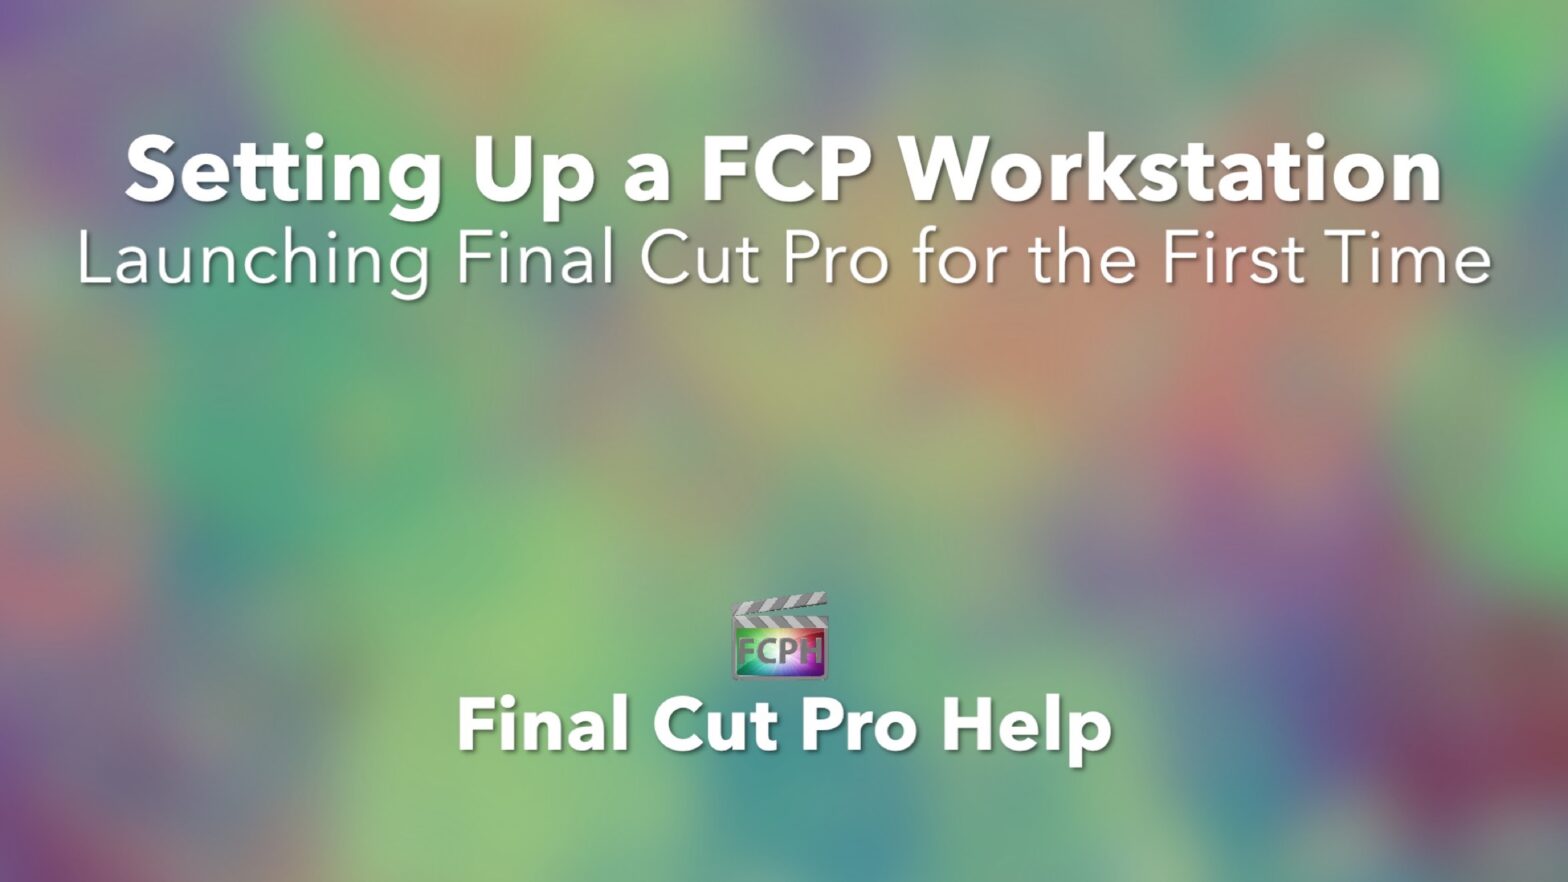 Launching Final Cut Pro for the First Time